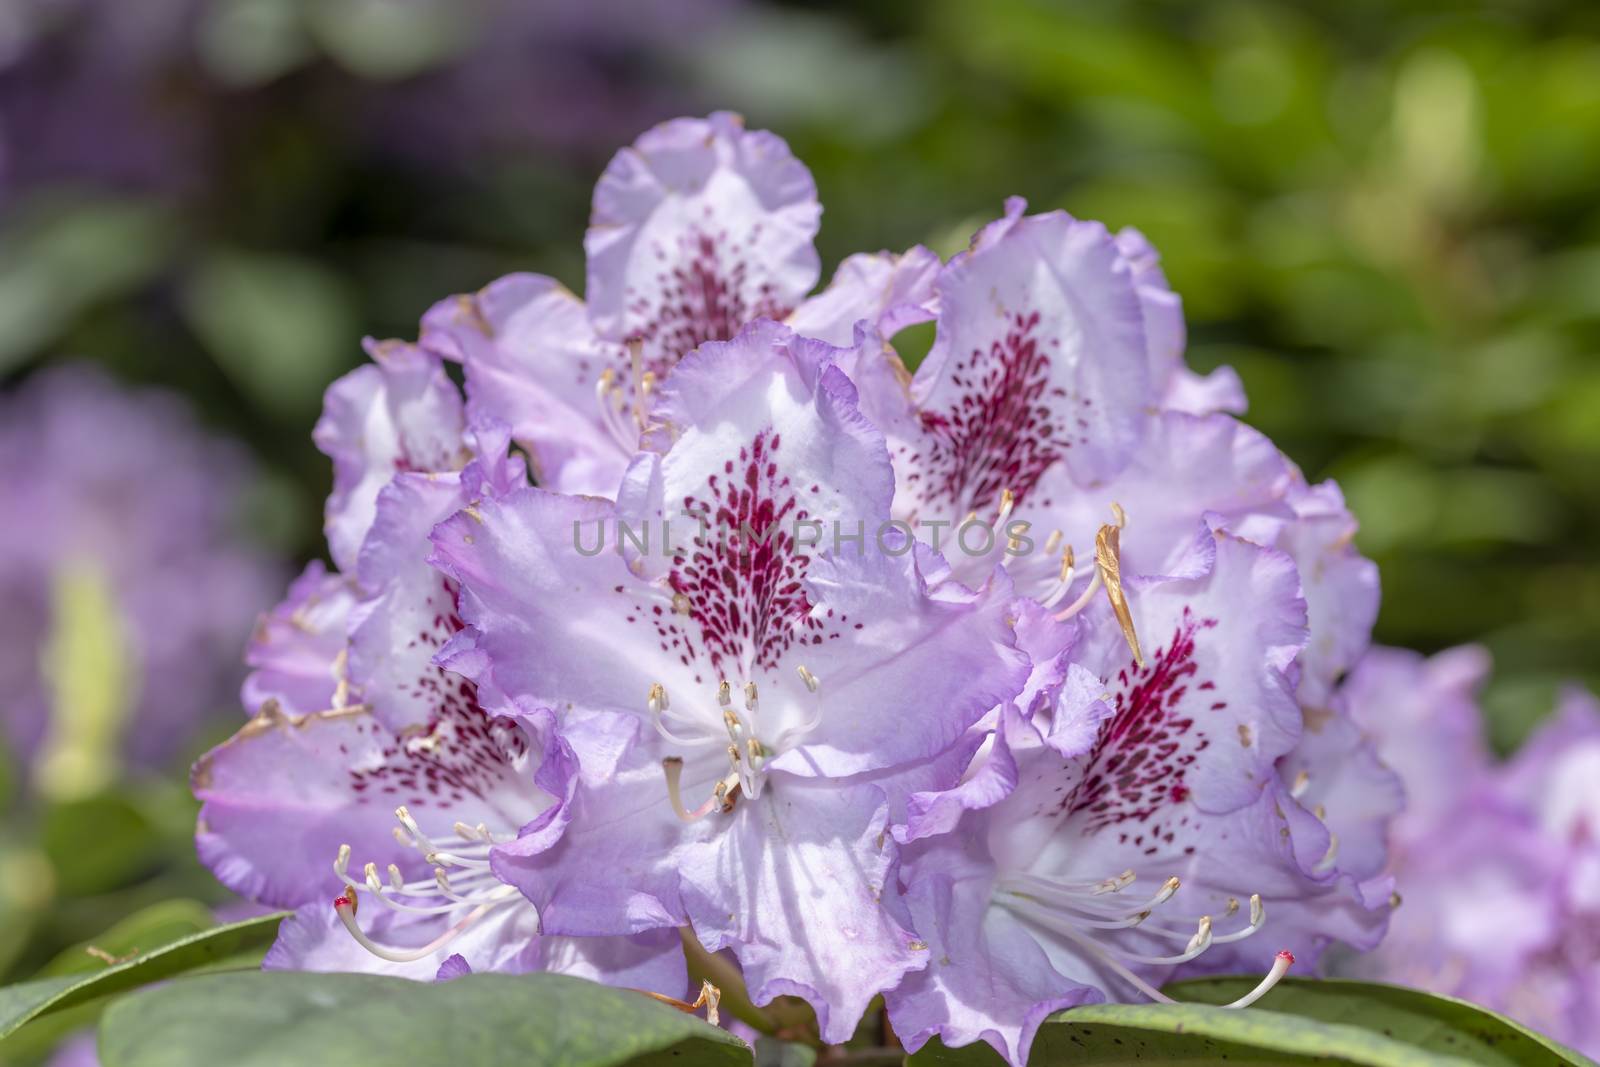 Purple color rhododendron flower blossom under a bright spring day lights